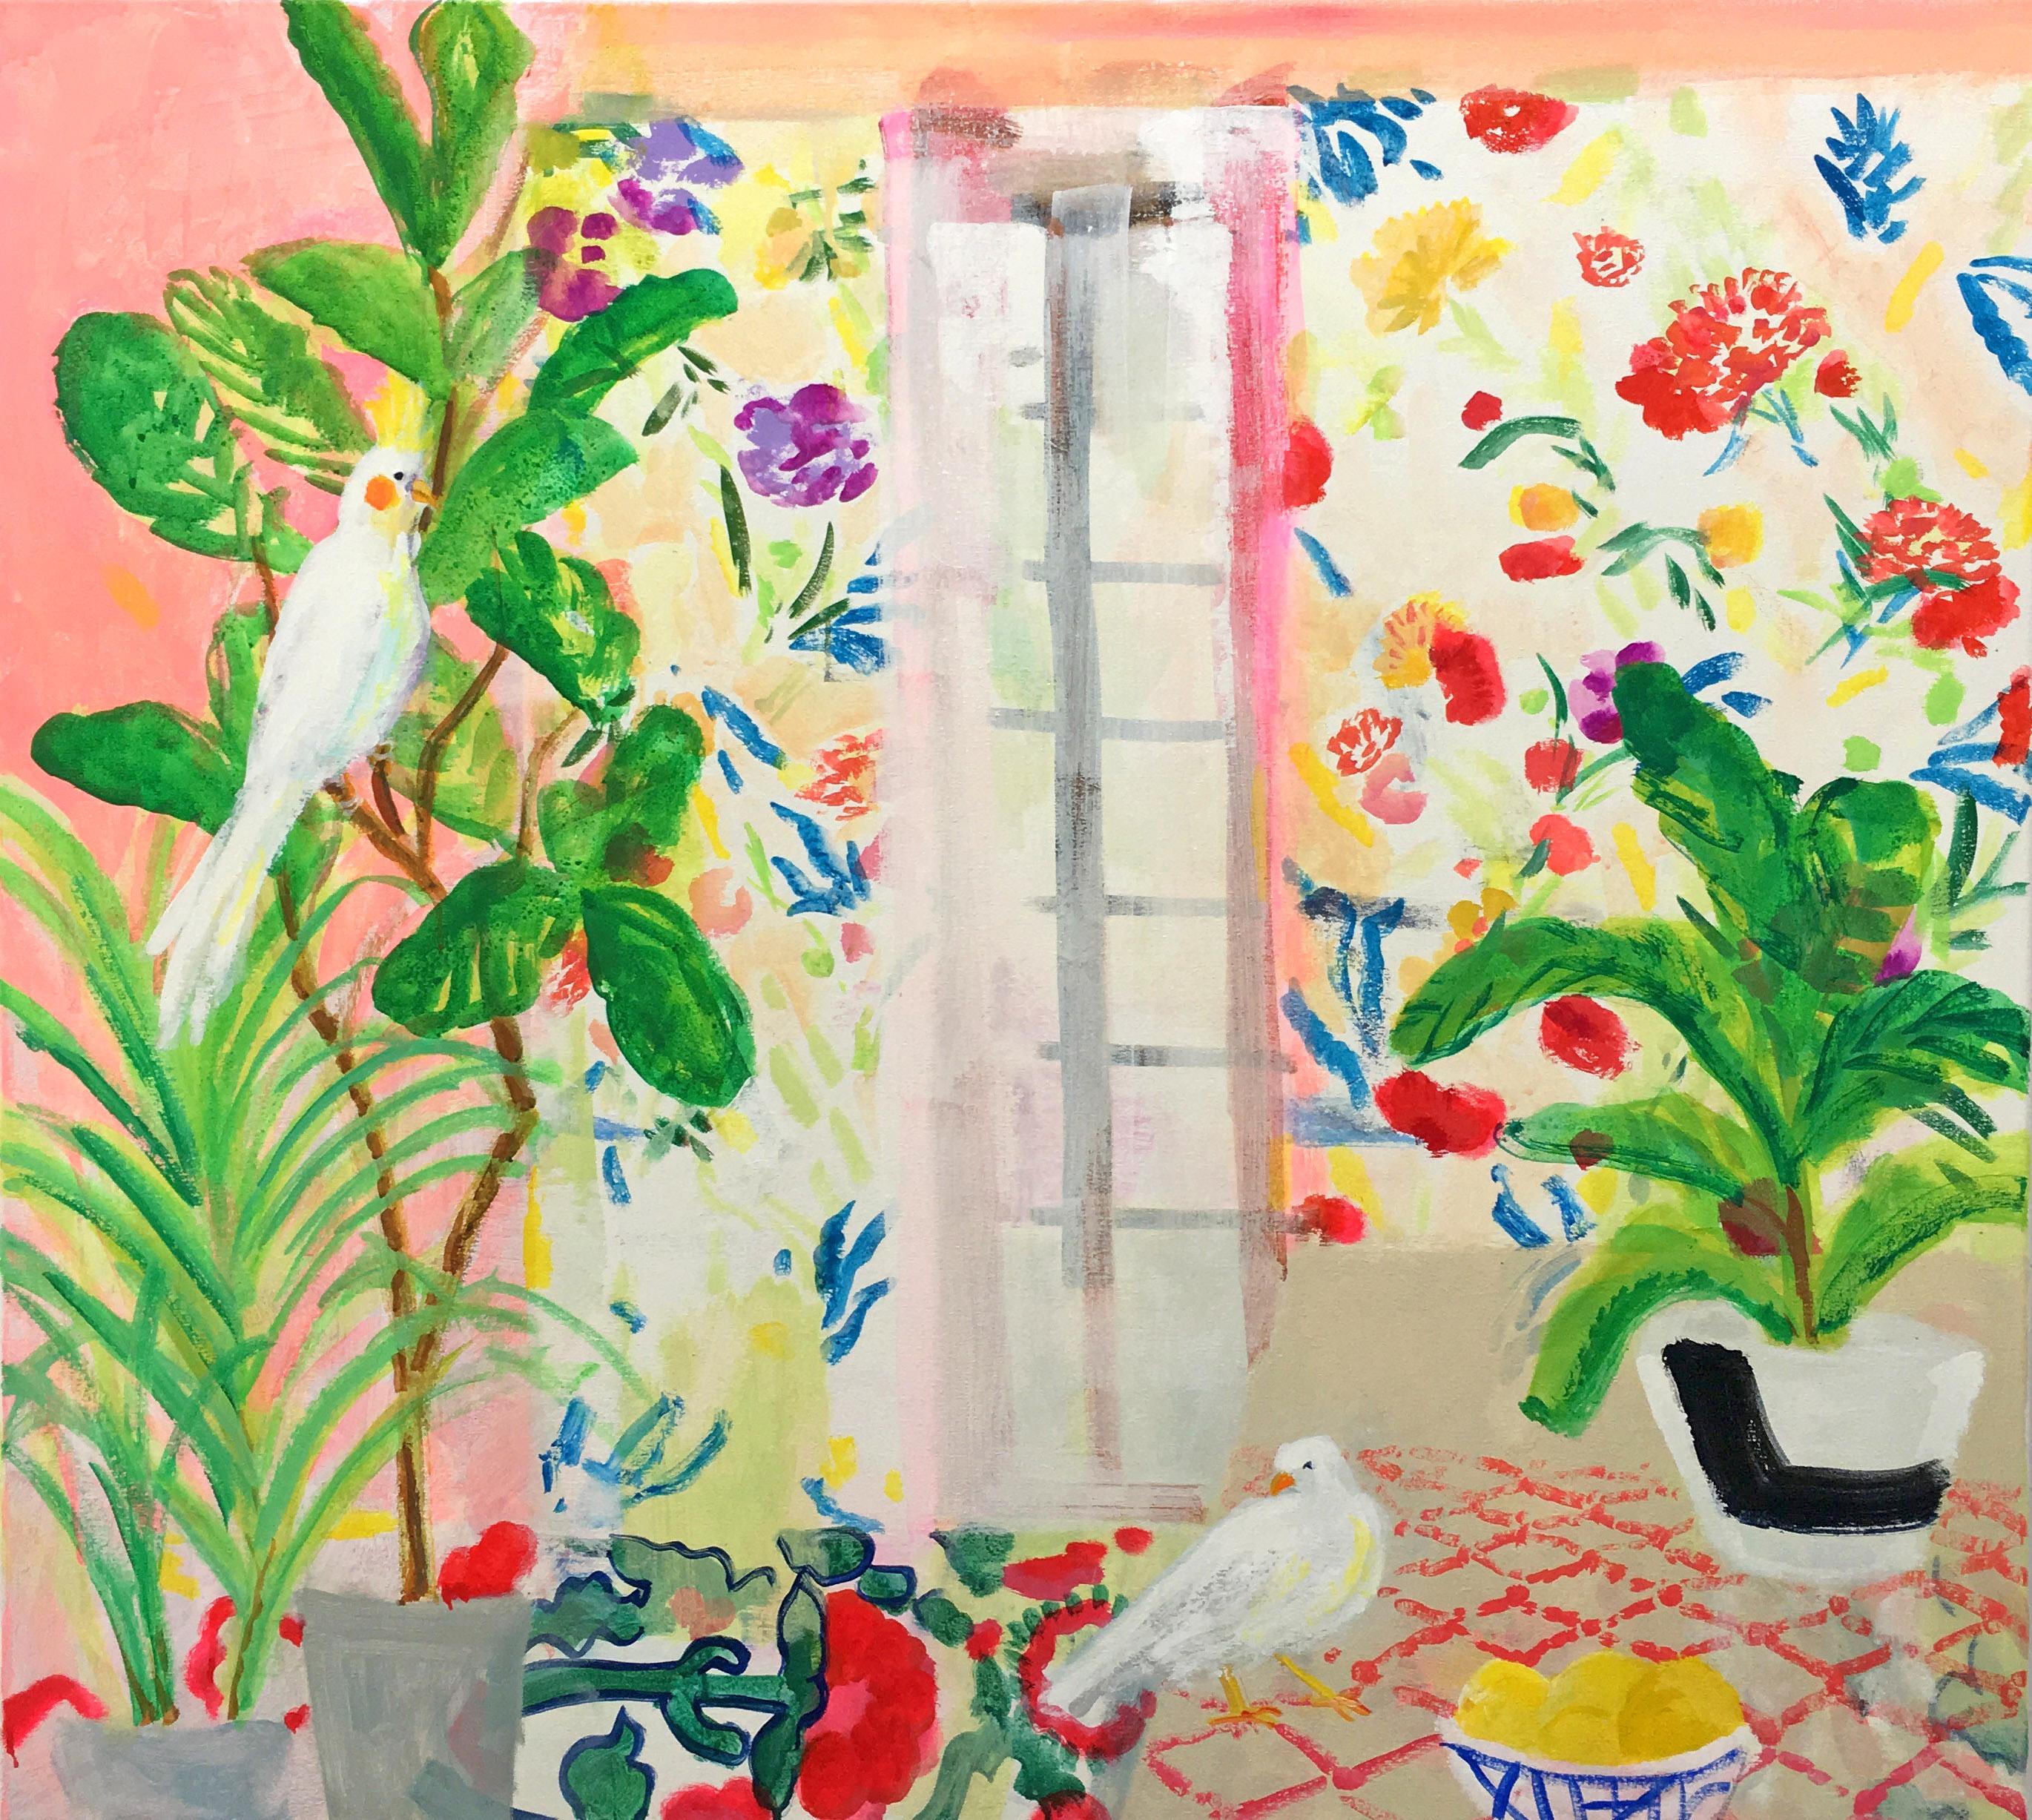 Figs and Feathers, Bright Interior with Birds, Green Plants, Colorful Flowers